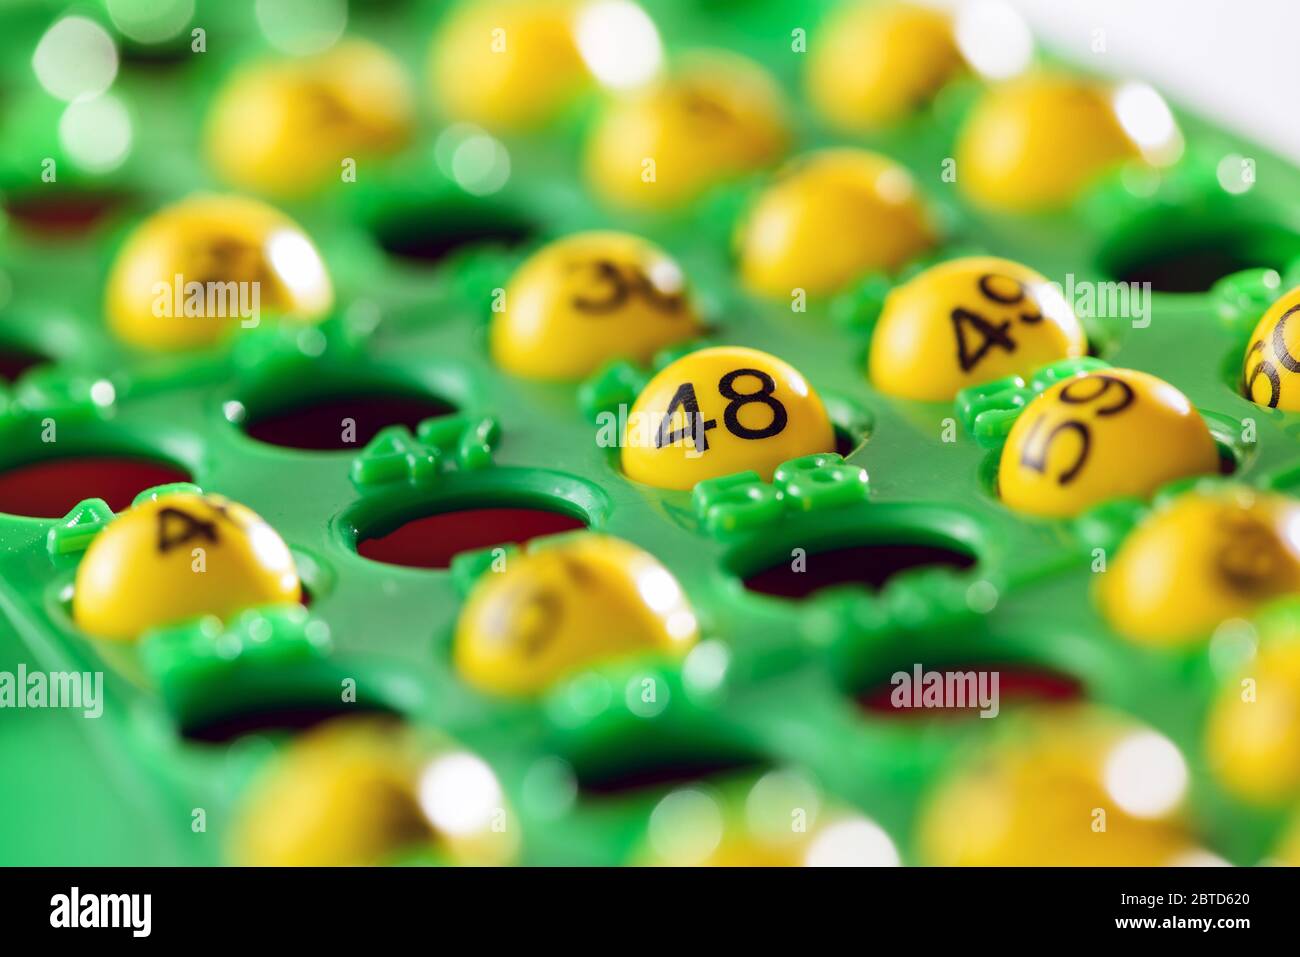 Colorful yellow Bingo balls with selective focus to the lucky number 48 in the center of the board Stock Photo